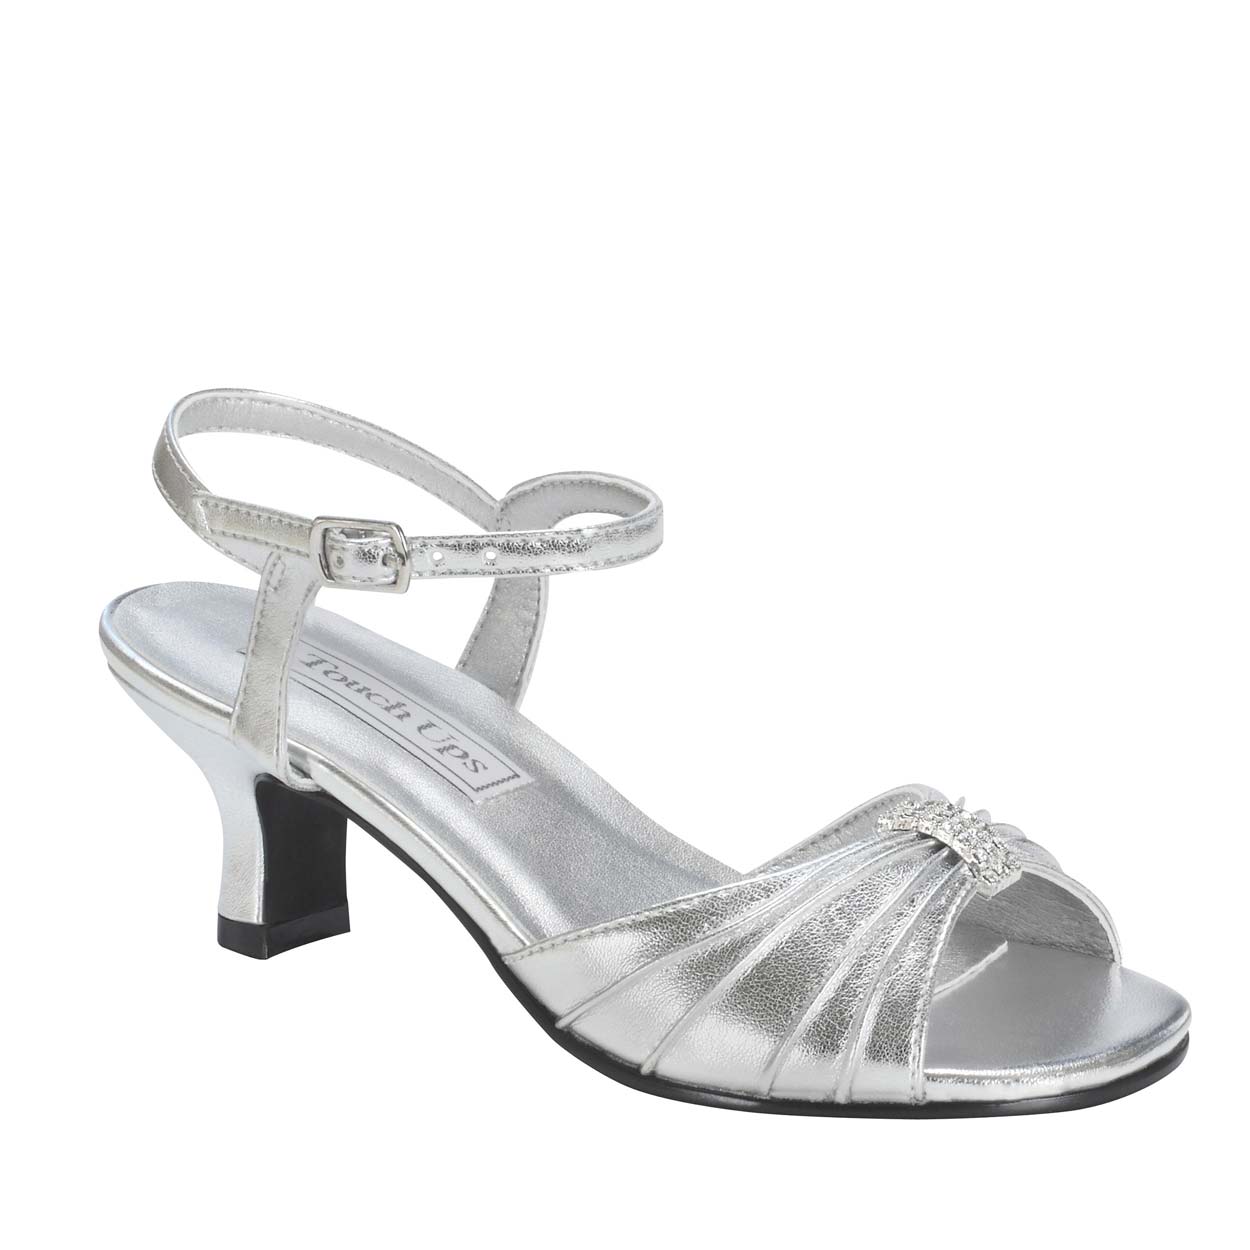 childrens bridesmaid shoes silver